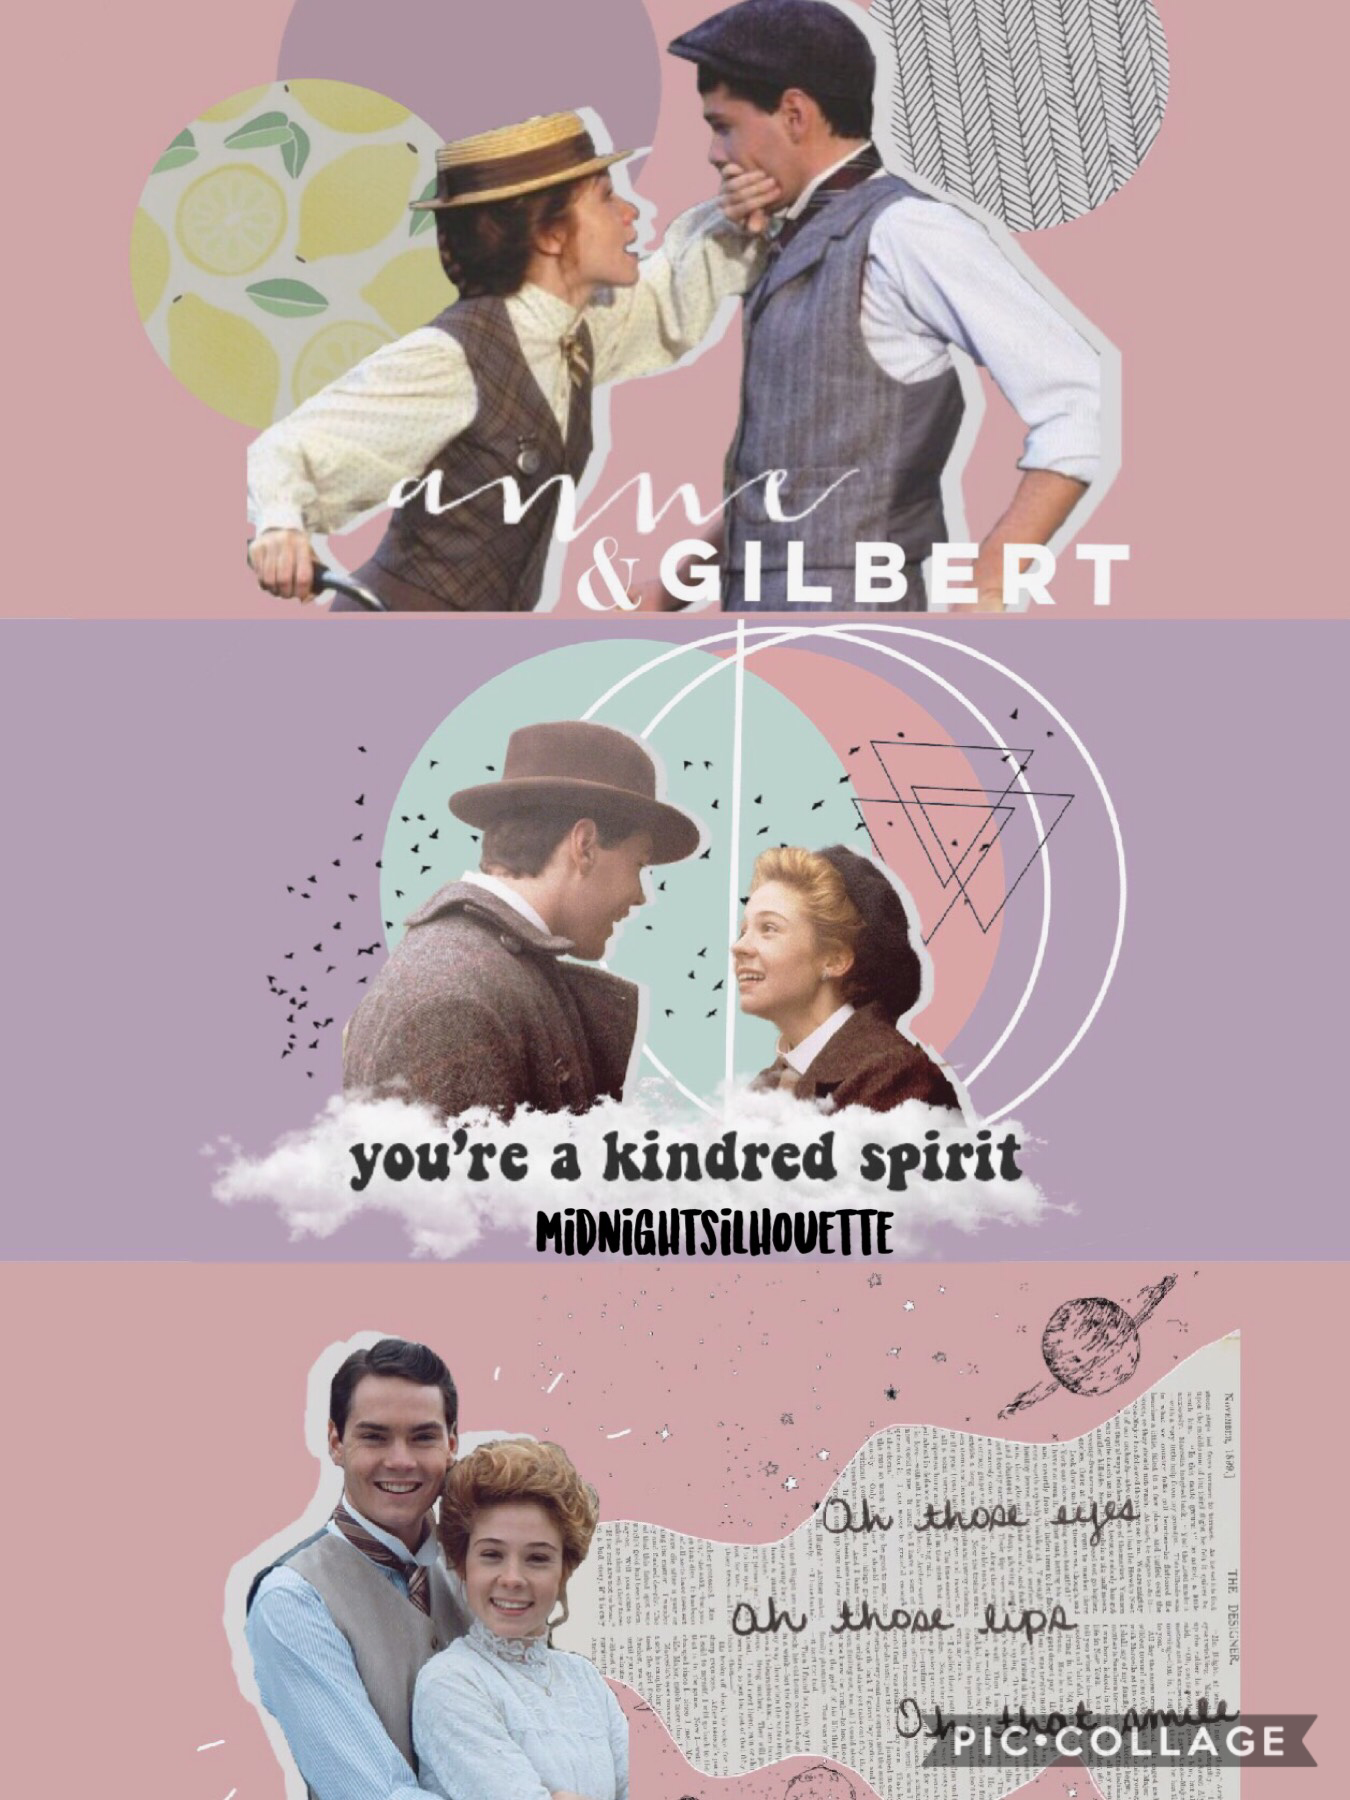 an anne and gilbert graphic edit - what do you think?